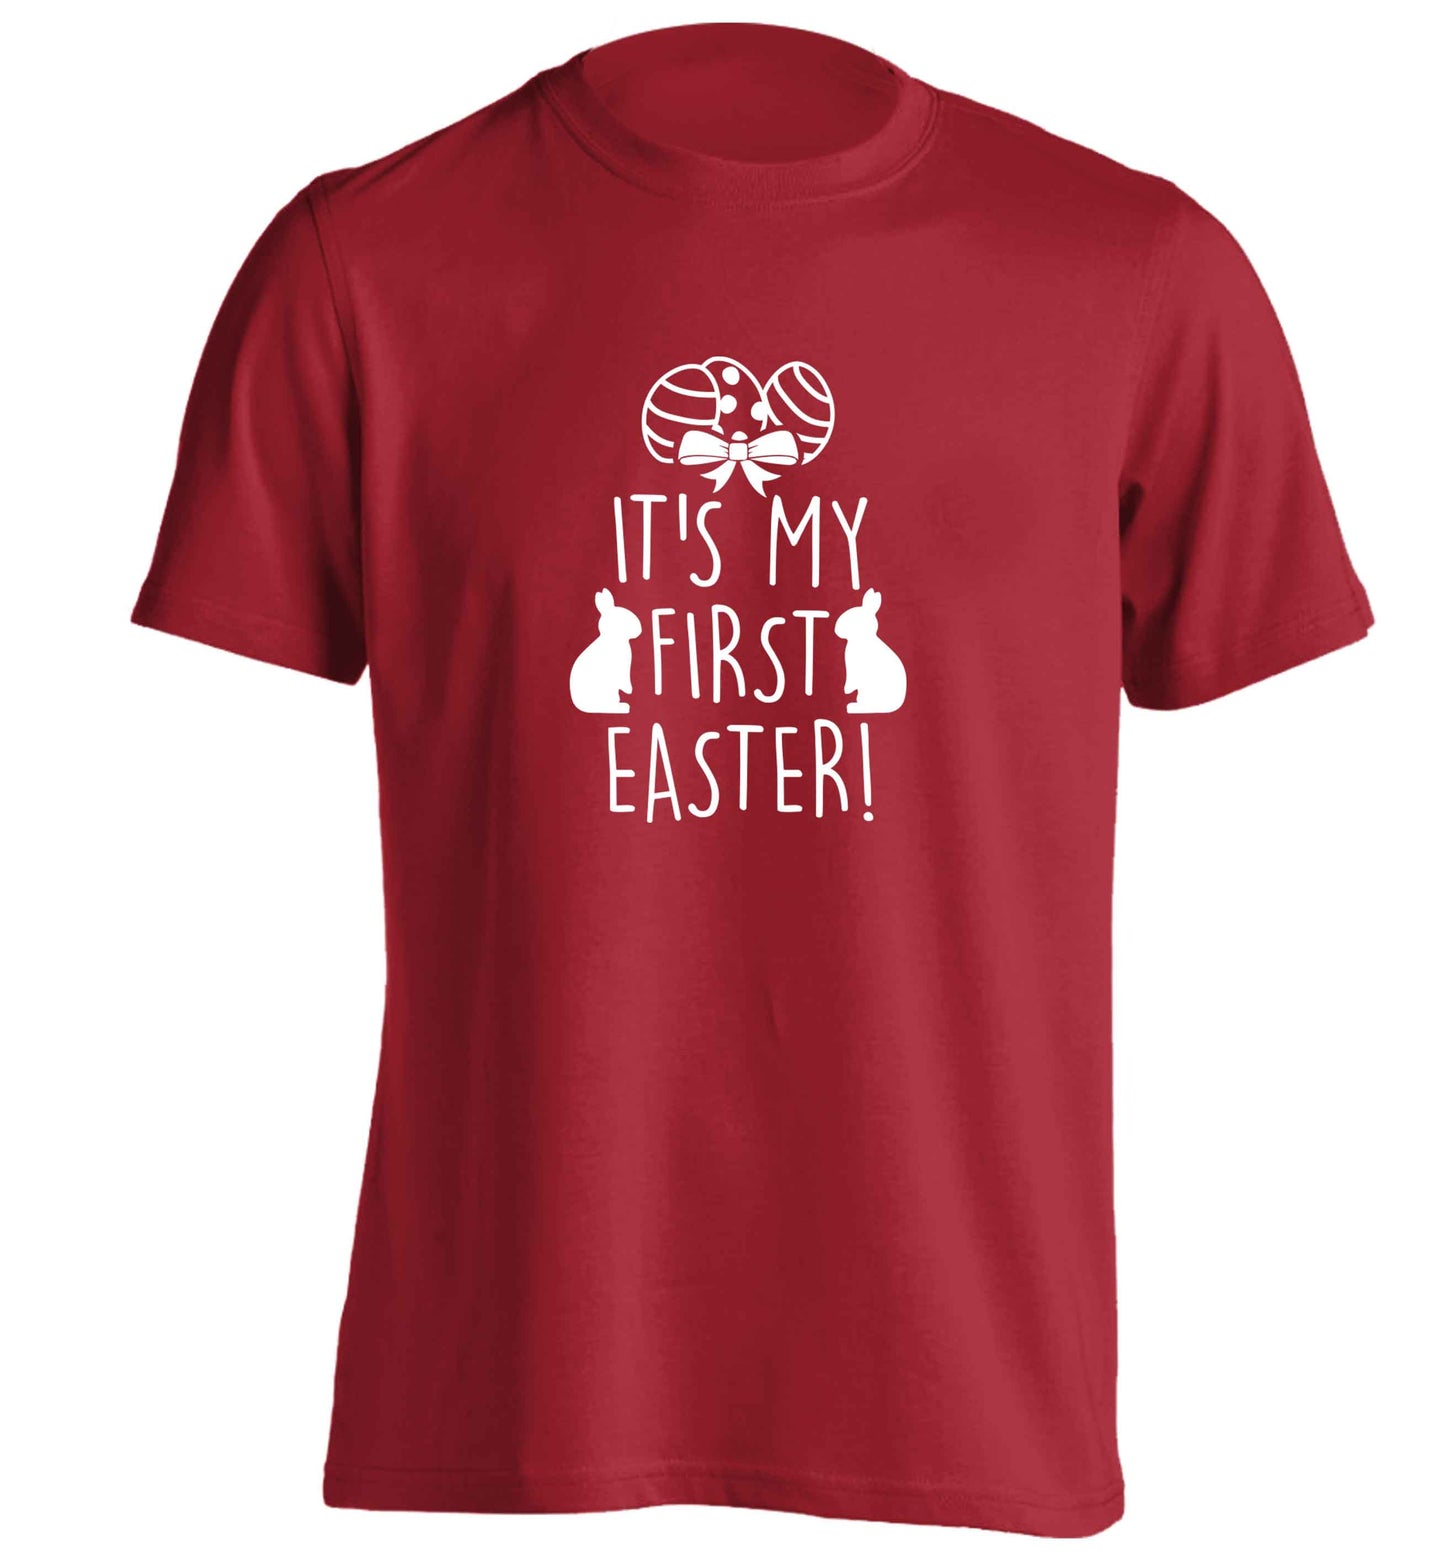 It's my first Easter adults unisex red Tshirt 2XL